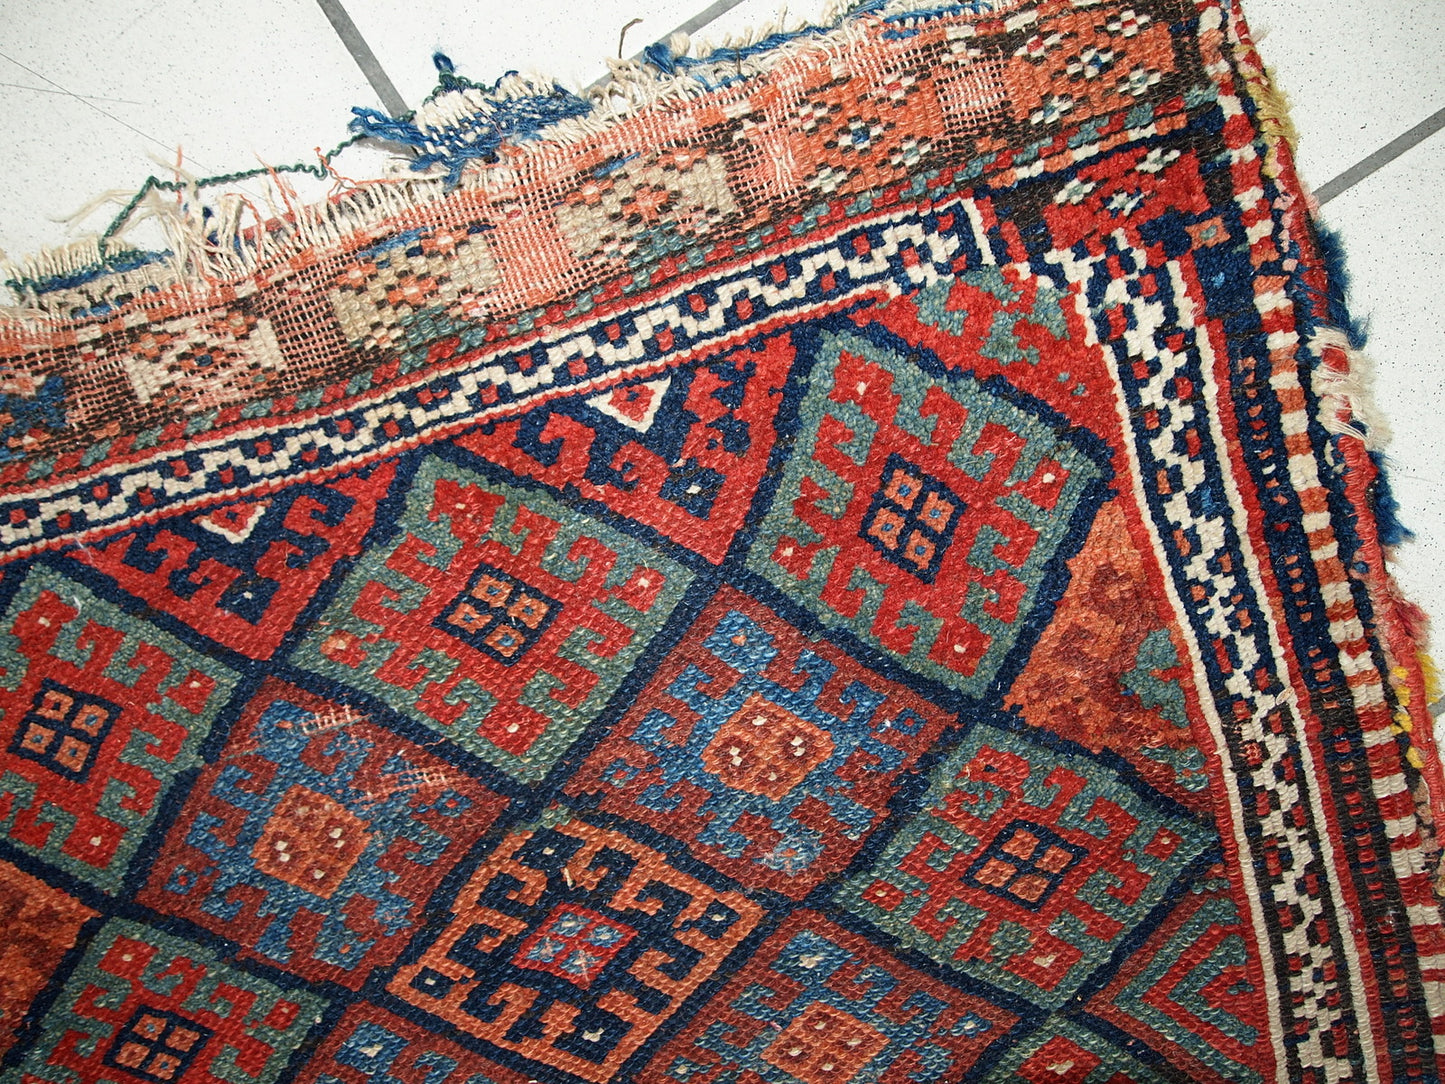 Hand made antique collectible Persian Kurdish bag in original condition, it has some age wear. This bag has typical Jaff design with repeating diamond in different shades. The back side kilim is striped in red and chocolate brown shades. 